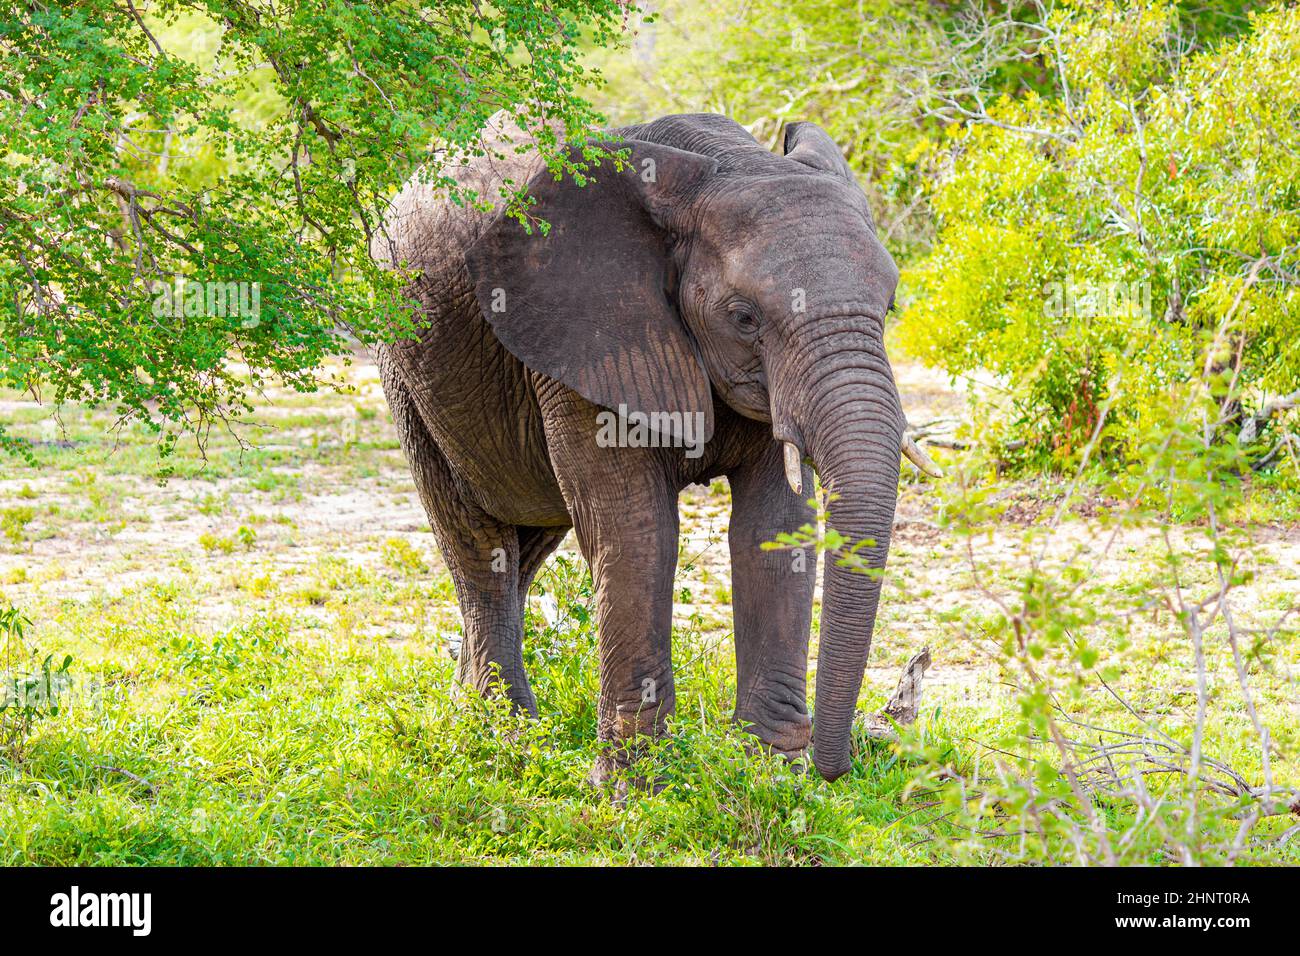 Big FIVE African elephant in the green nature on safari in Kruger